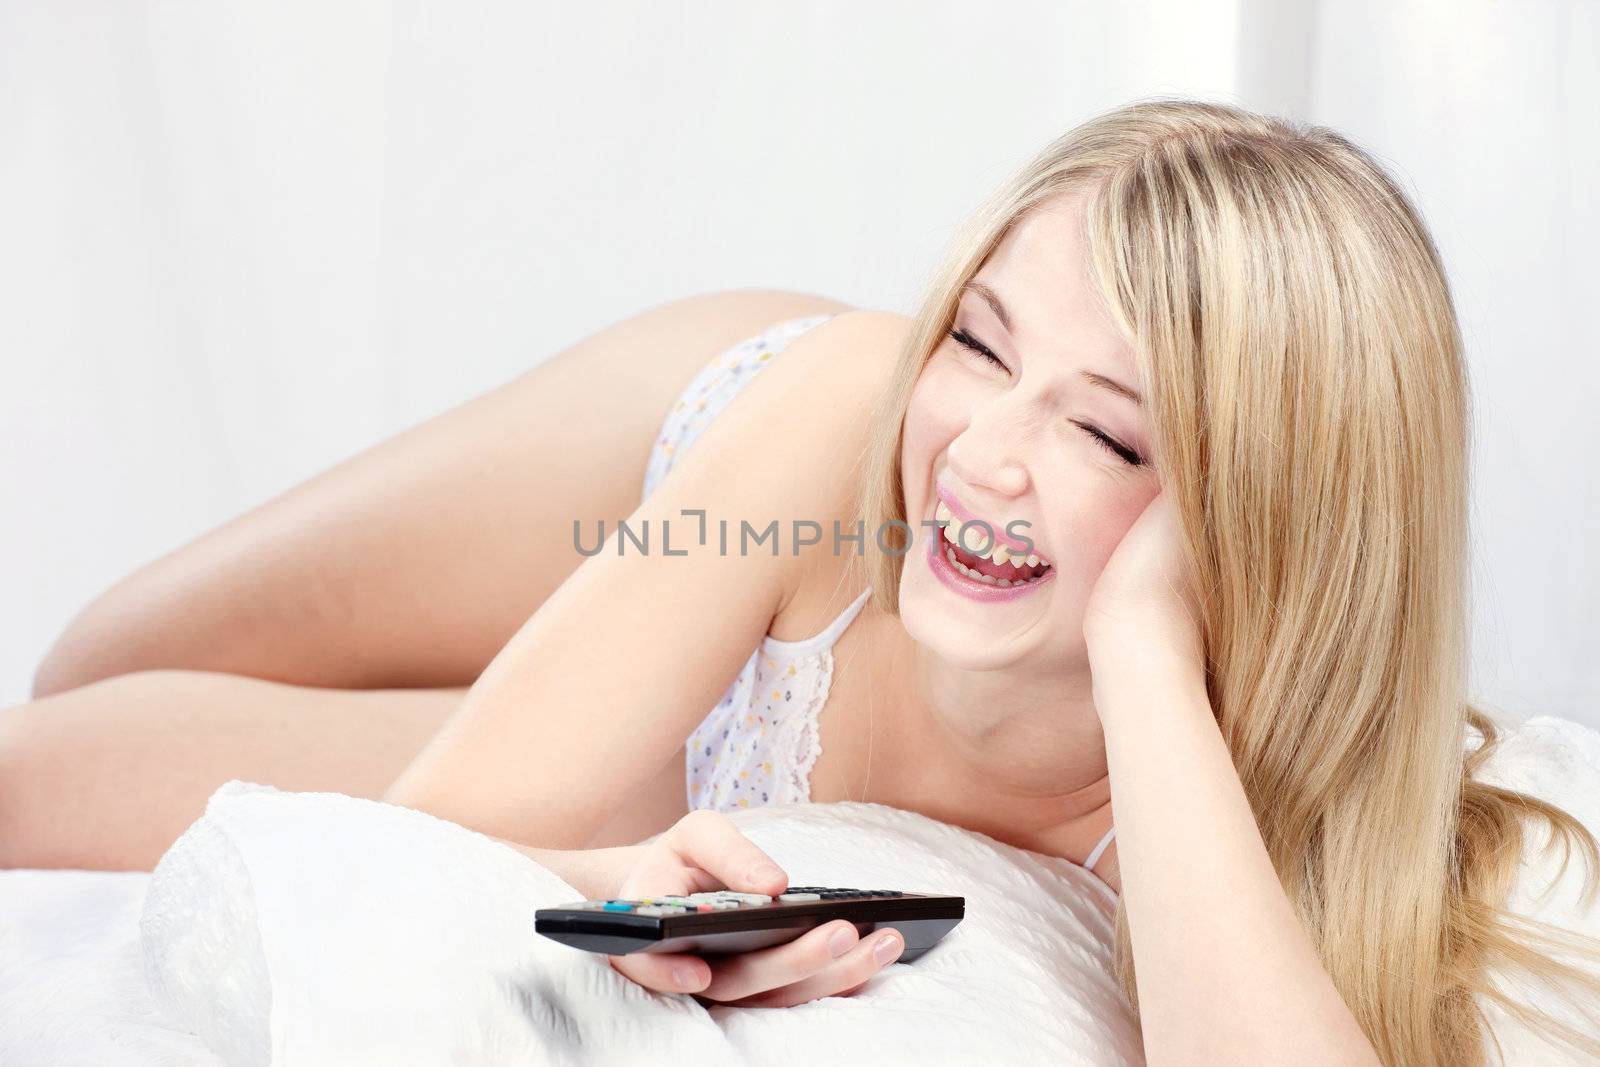 Smiling woman on bed by imarin